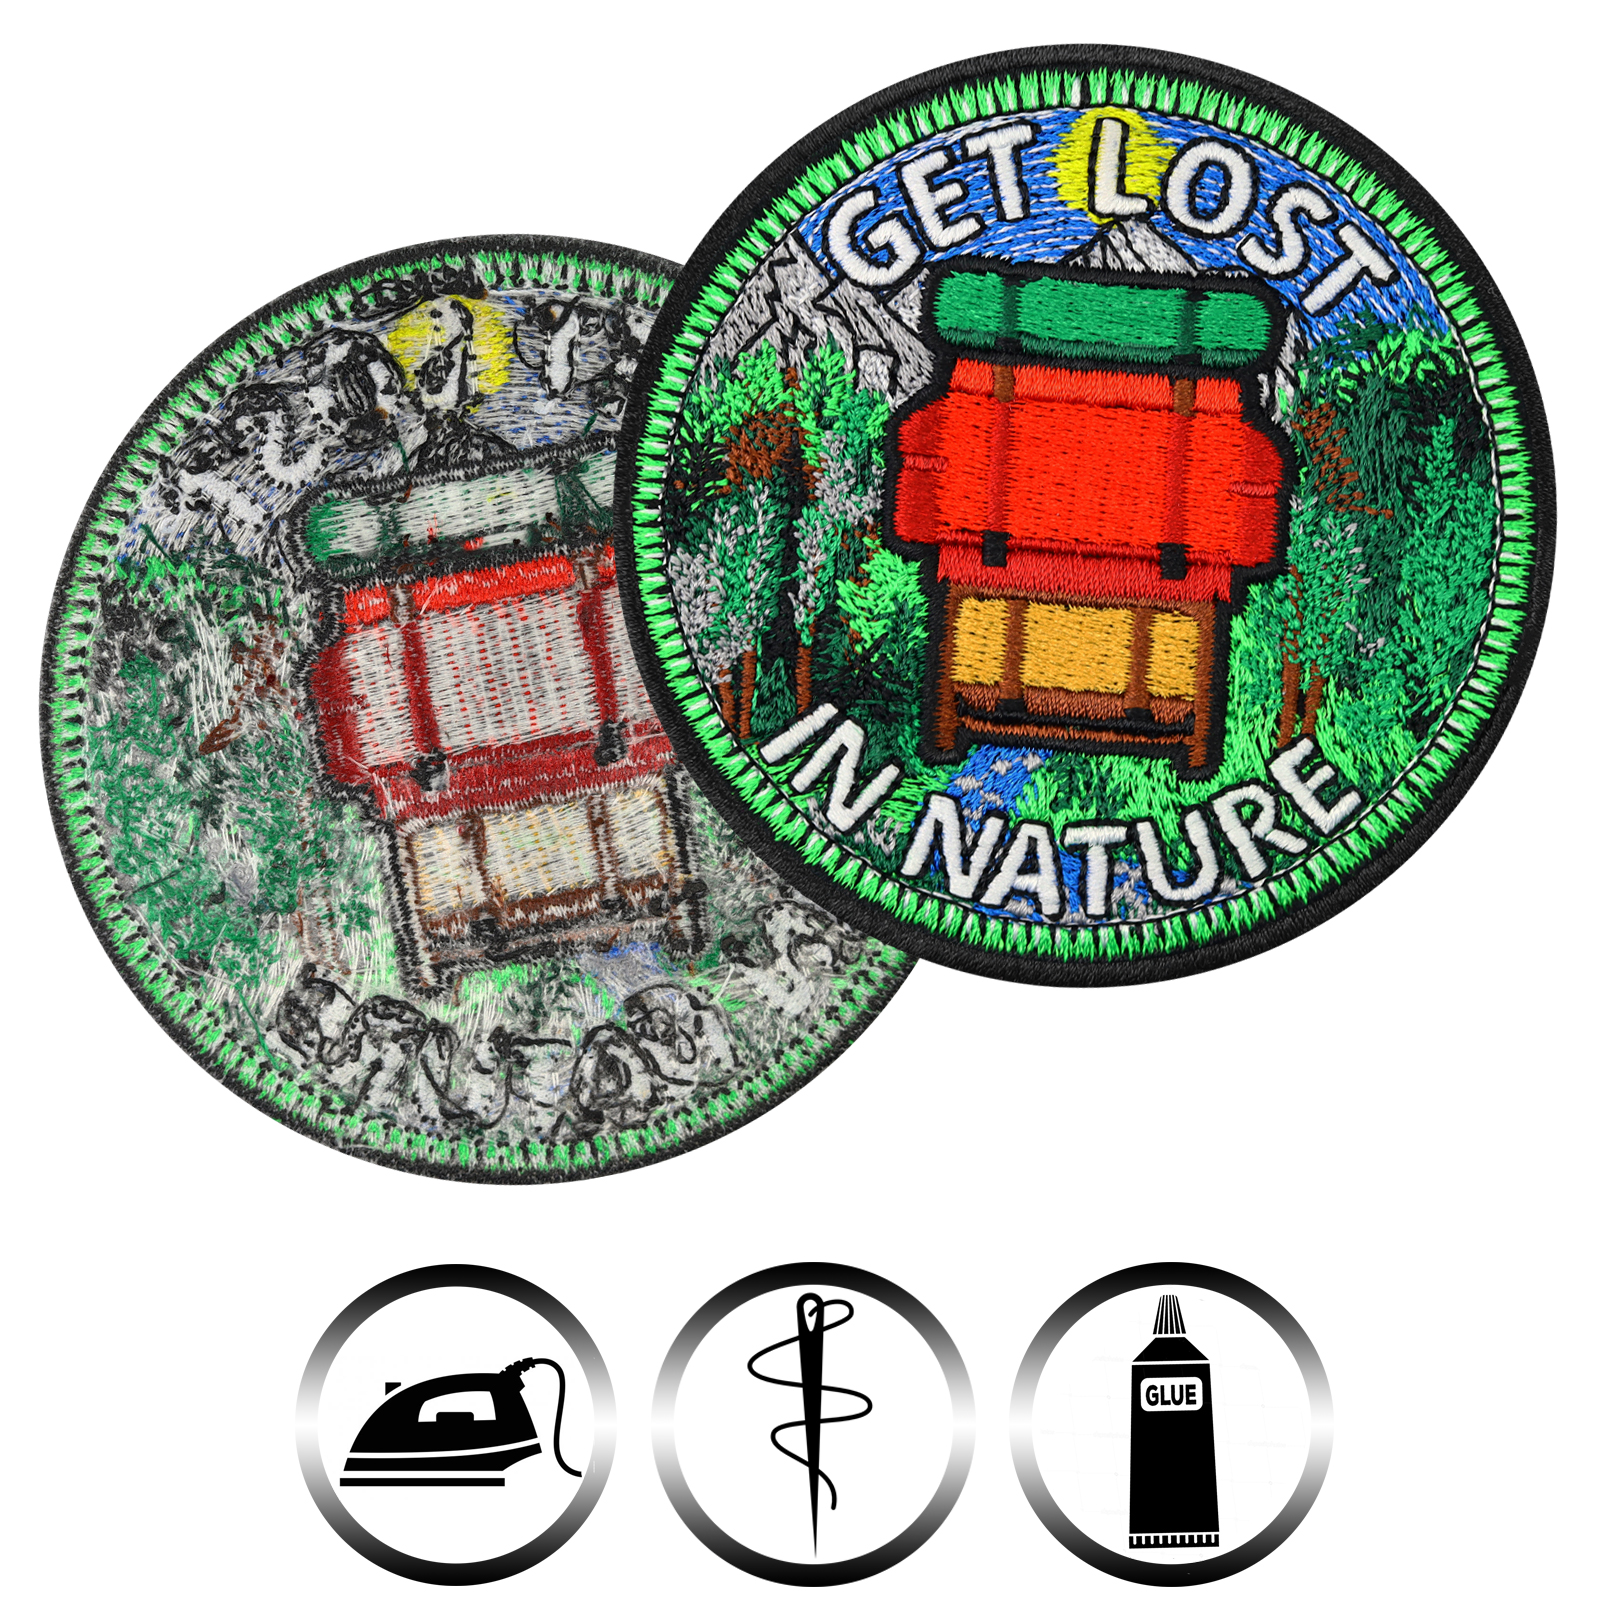 Get lost in nature - Patch